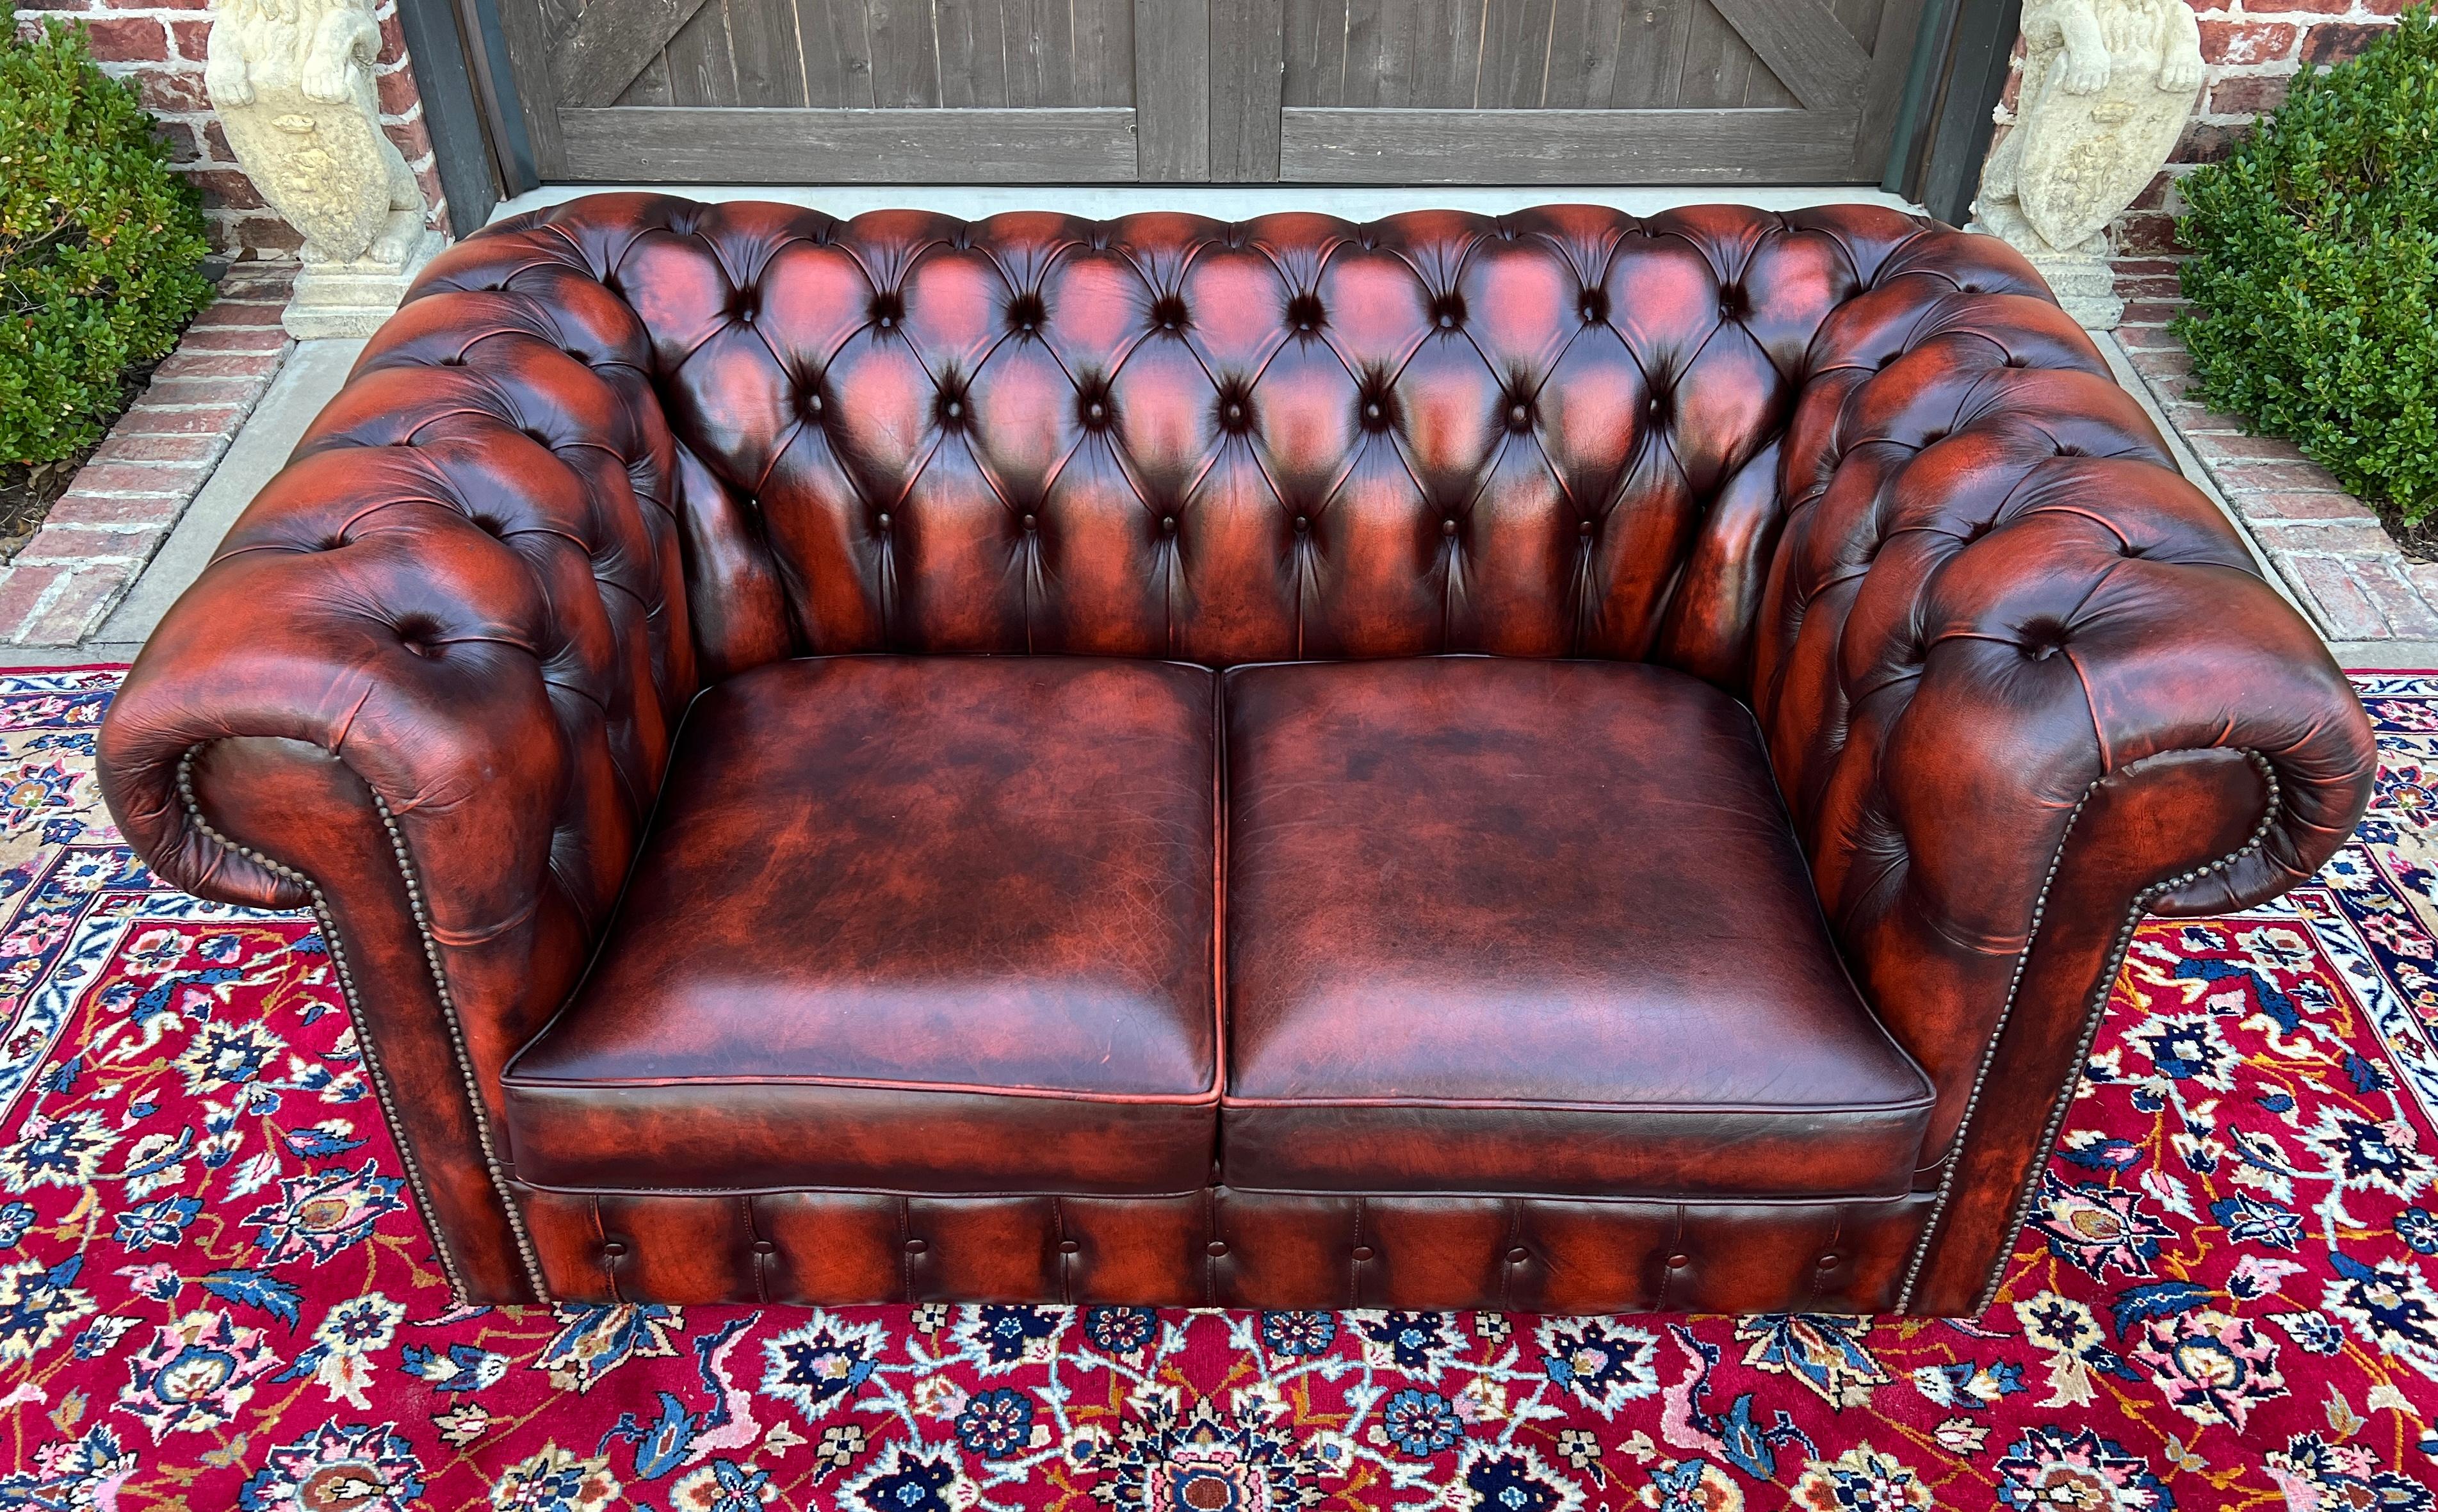 Vintage English Chesterfield Leather Tufted Love Seat Sofa Oxblood Red #2 13